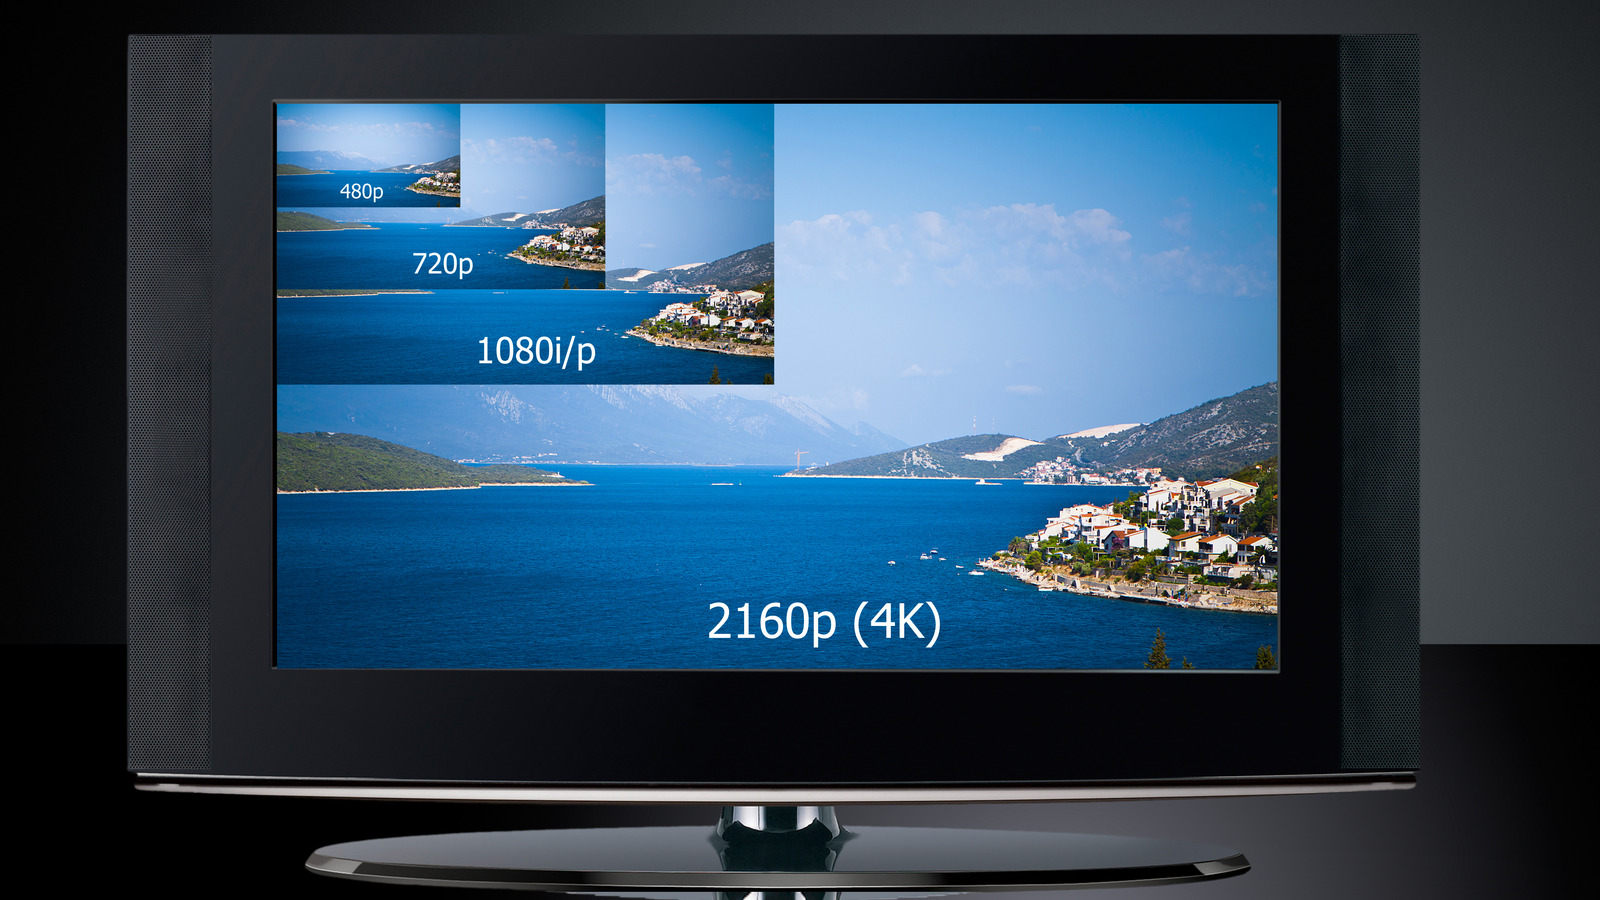 4K Vs 1080p: When Can You Tell The Difference? - SlashGear - TrendRadars